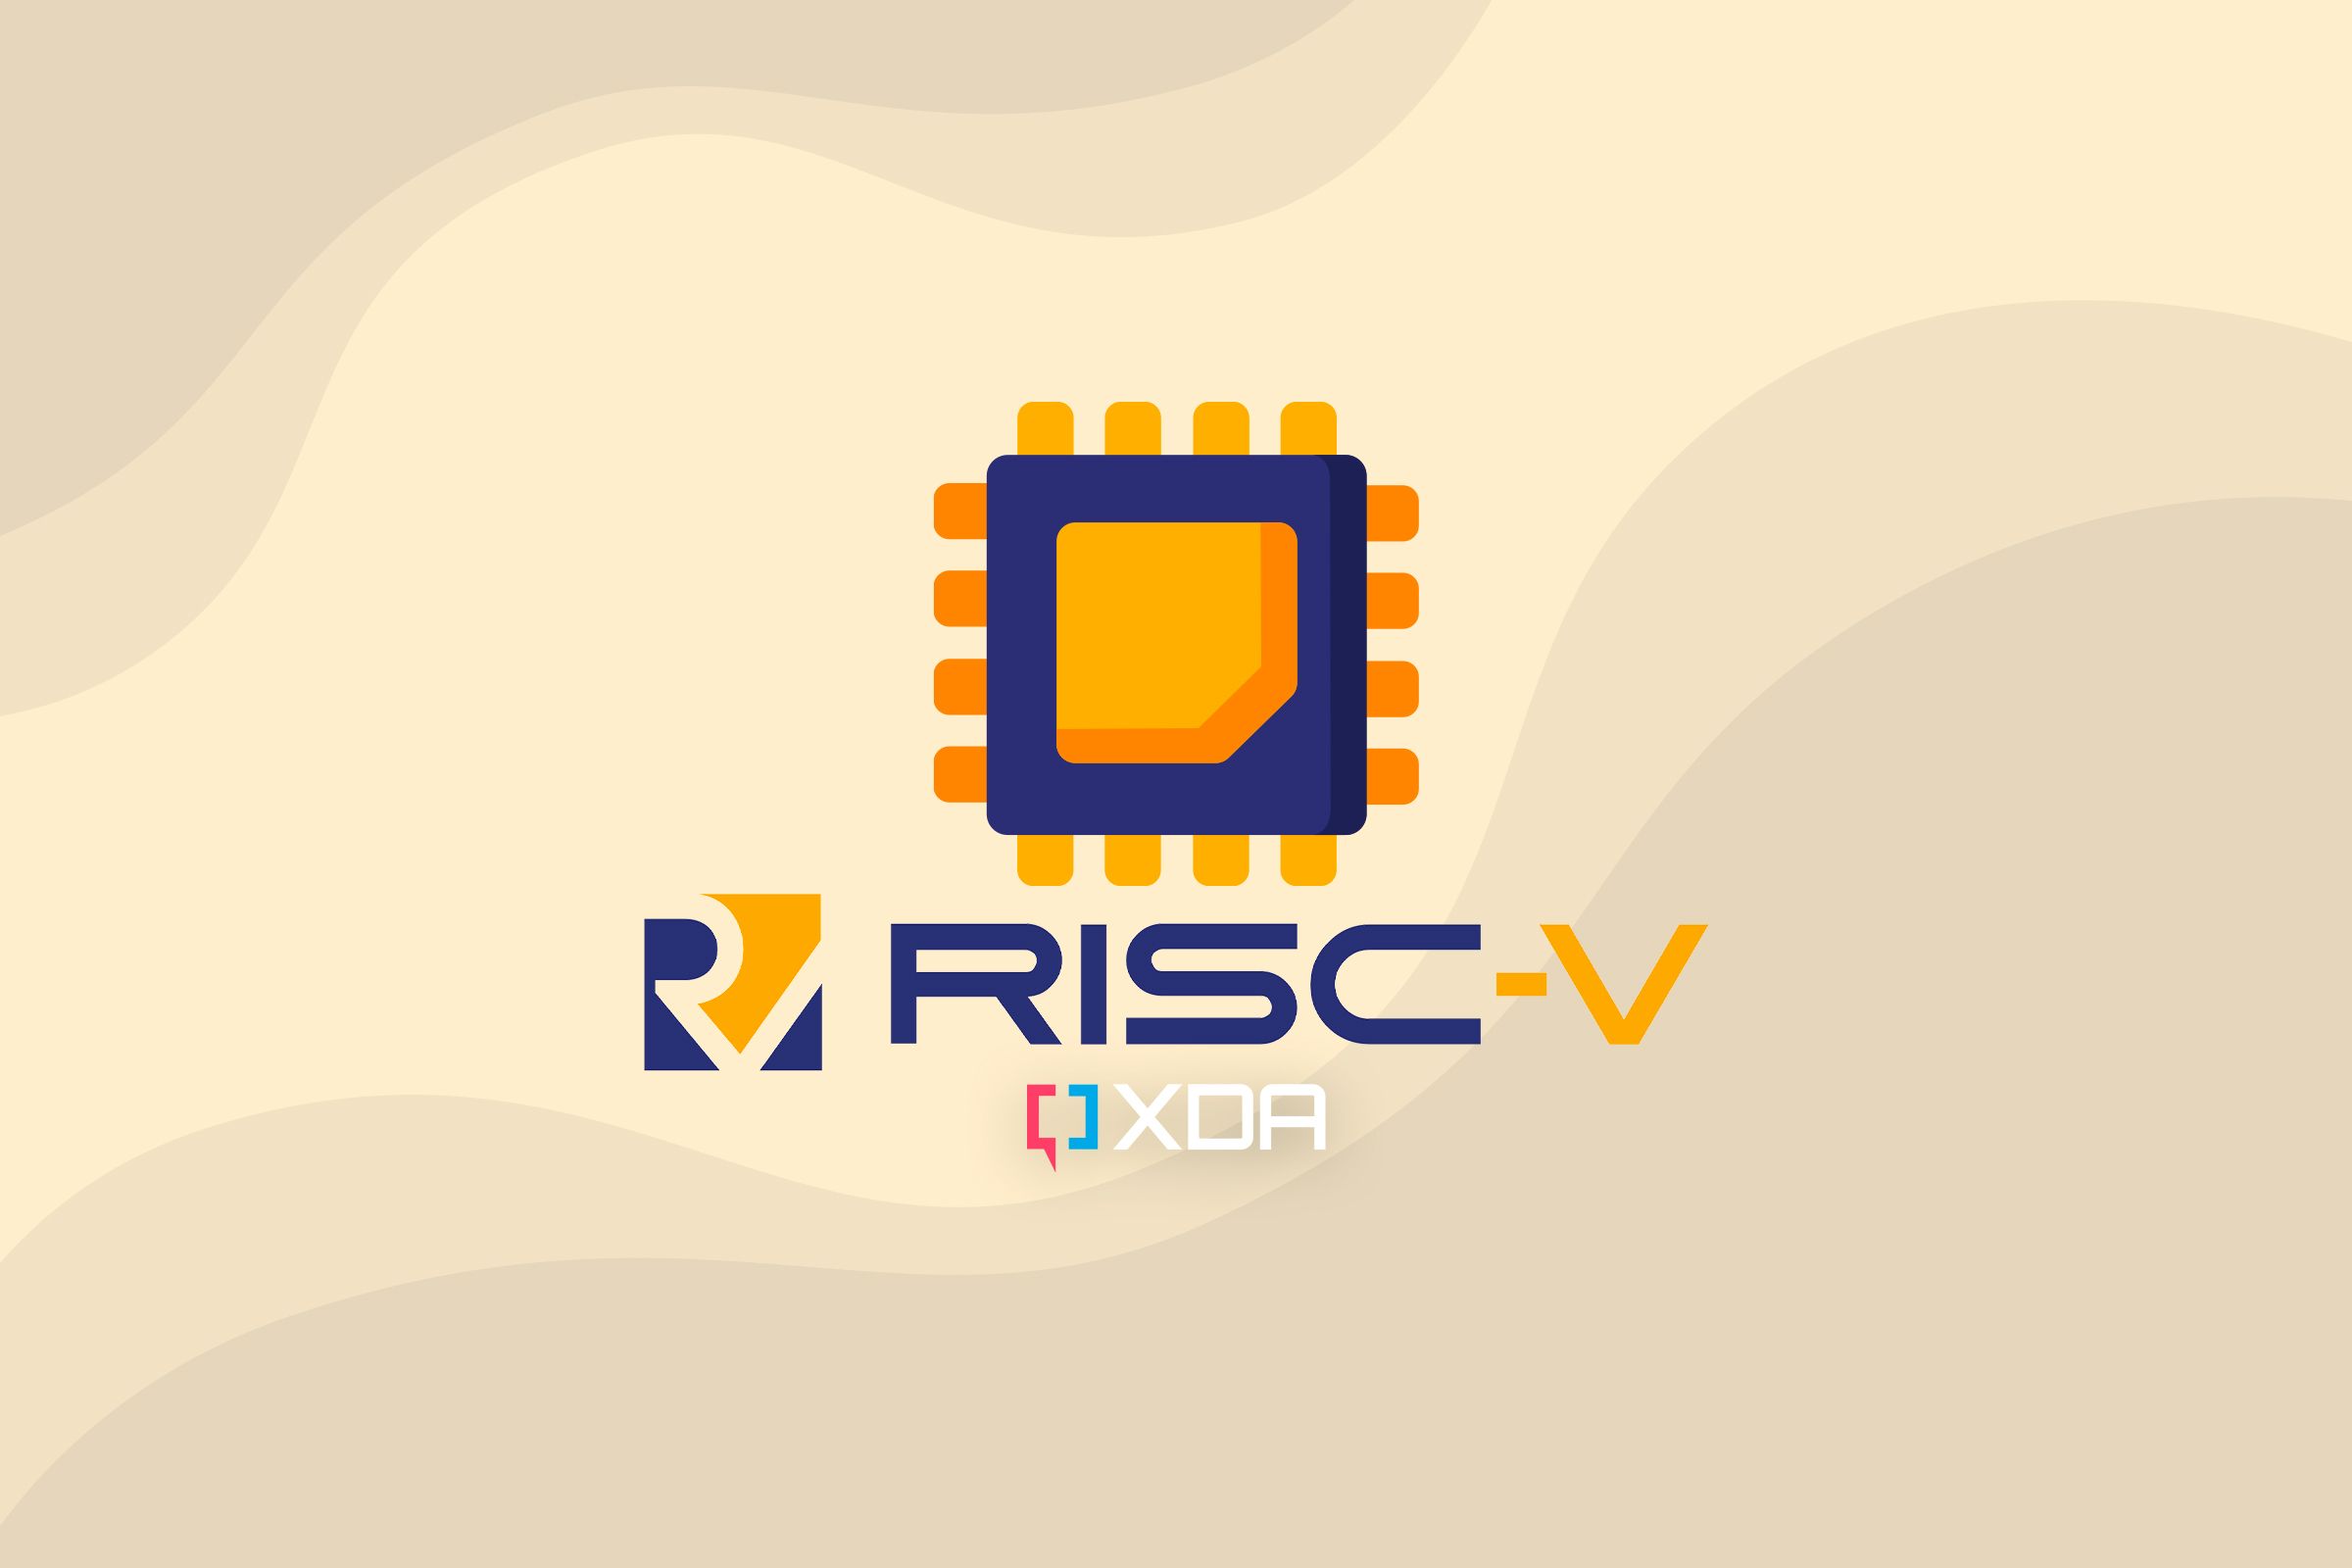 What is RISC-V